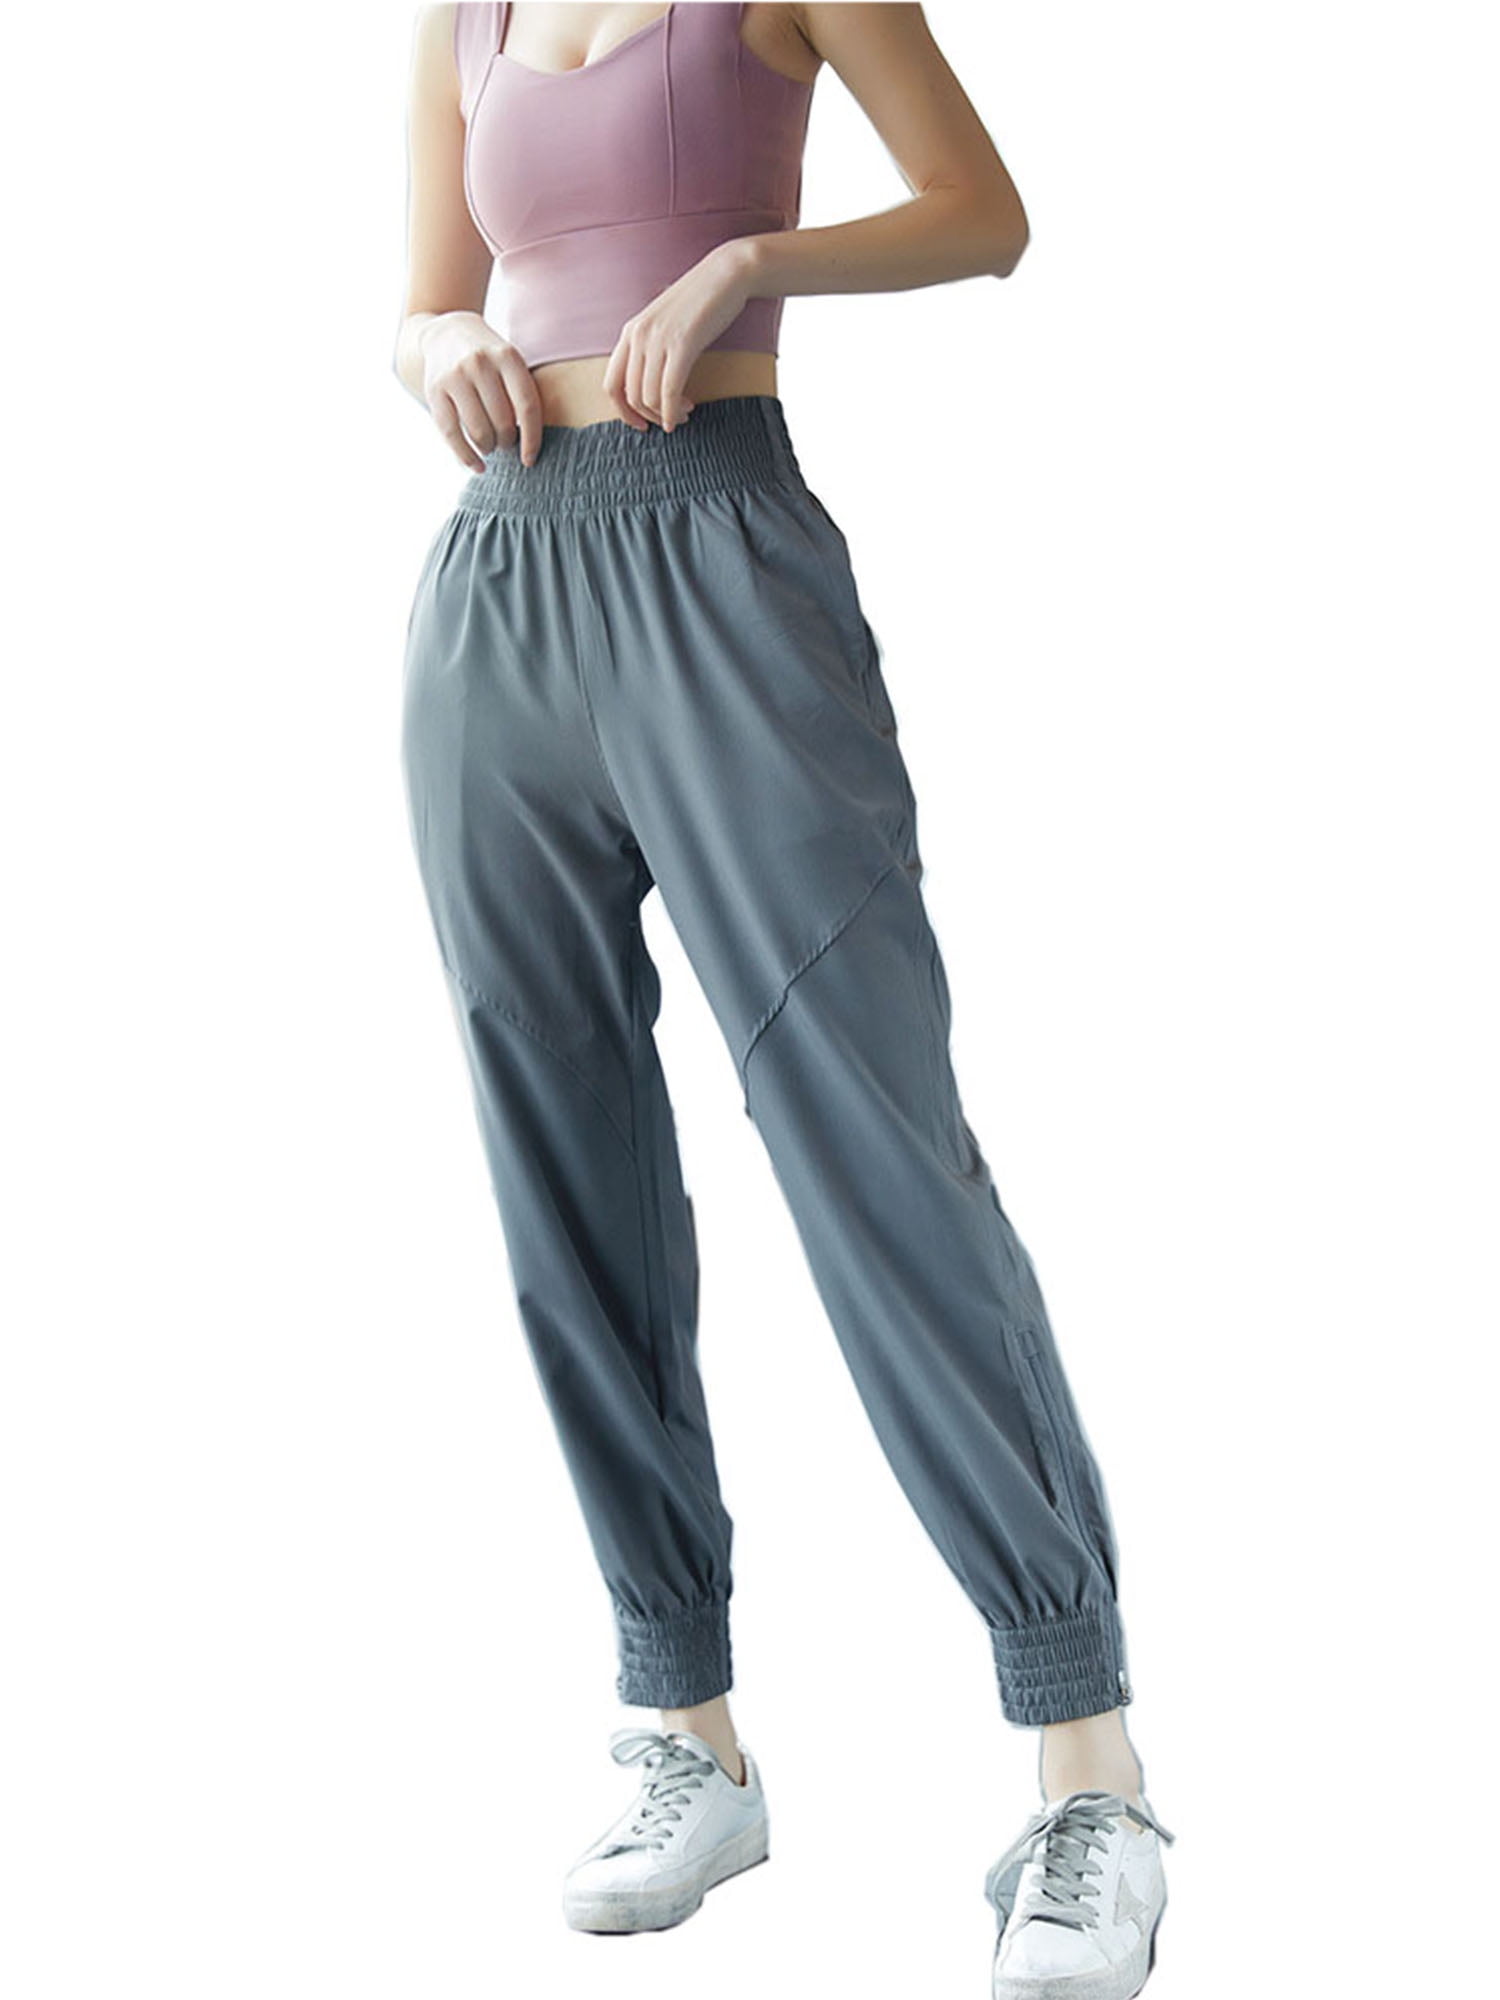 TOKY Joggers for Women high Waist Yoga Workout Sweatpants with Pockets Women's Lounge Pants 